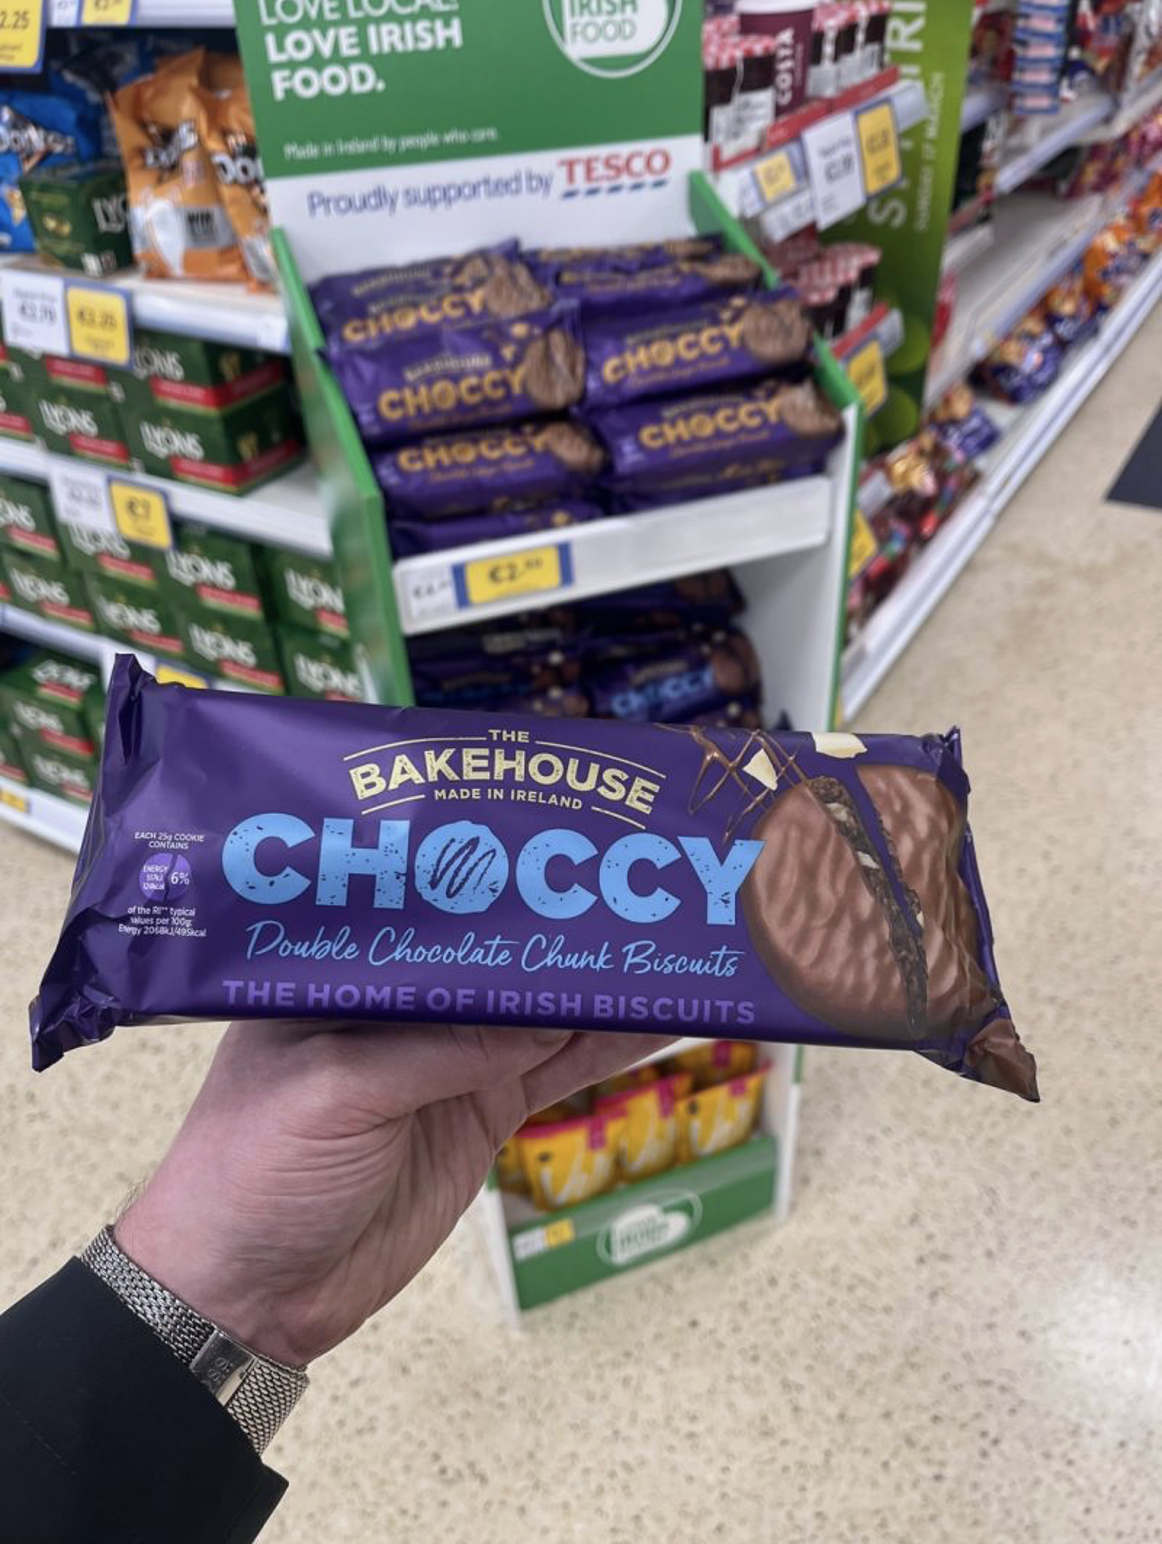 We are now live in Tesco!